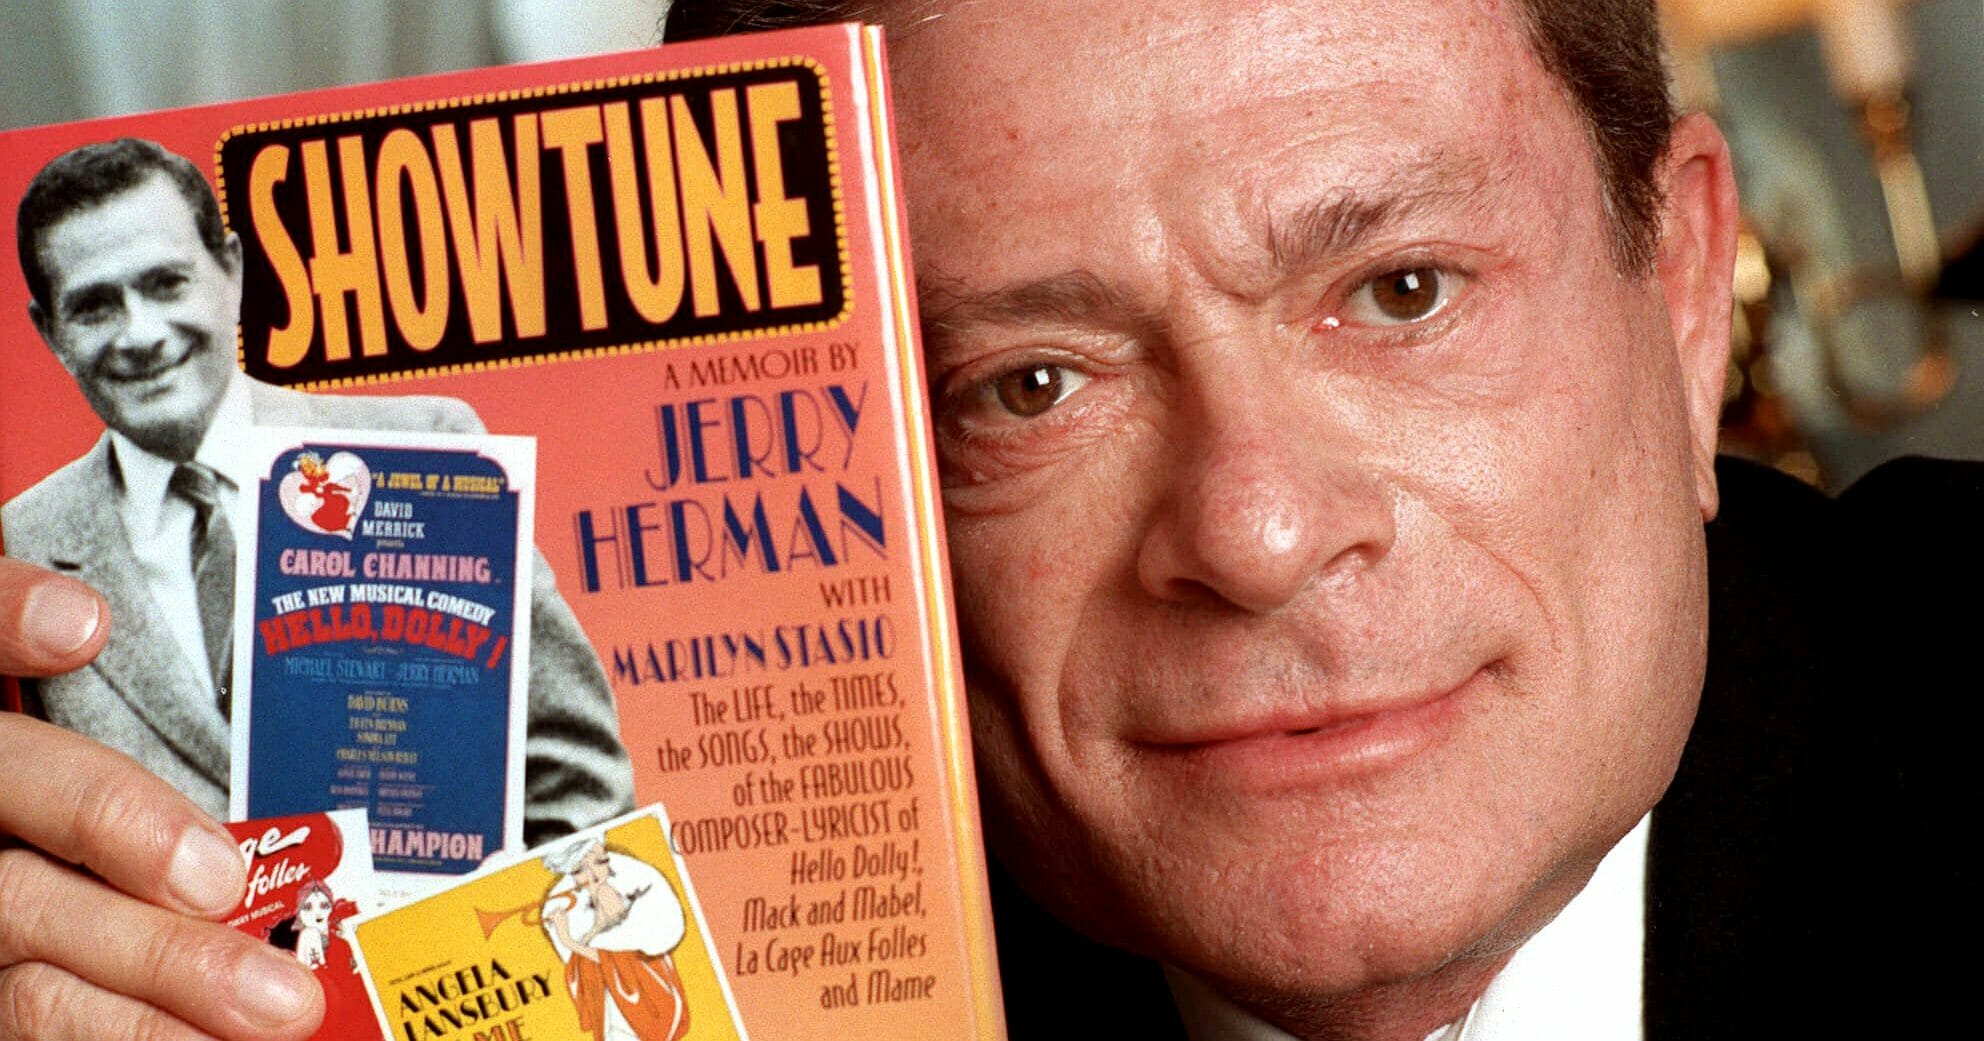 Composer Jerry Herman displays his book "Showtune" Nov. 19, 1996, in New York.